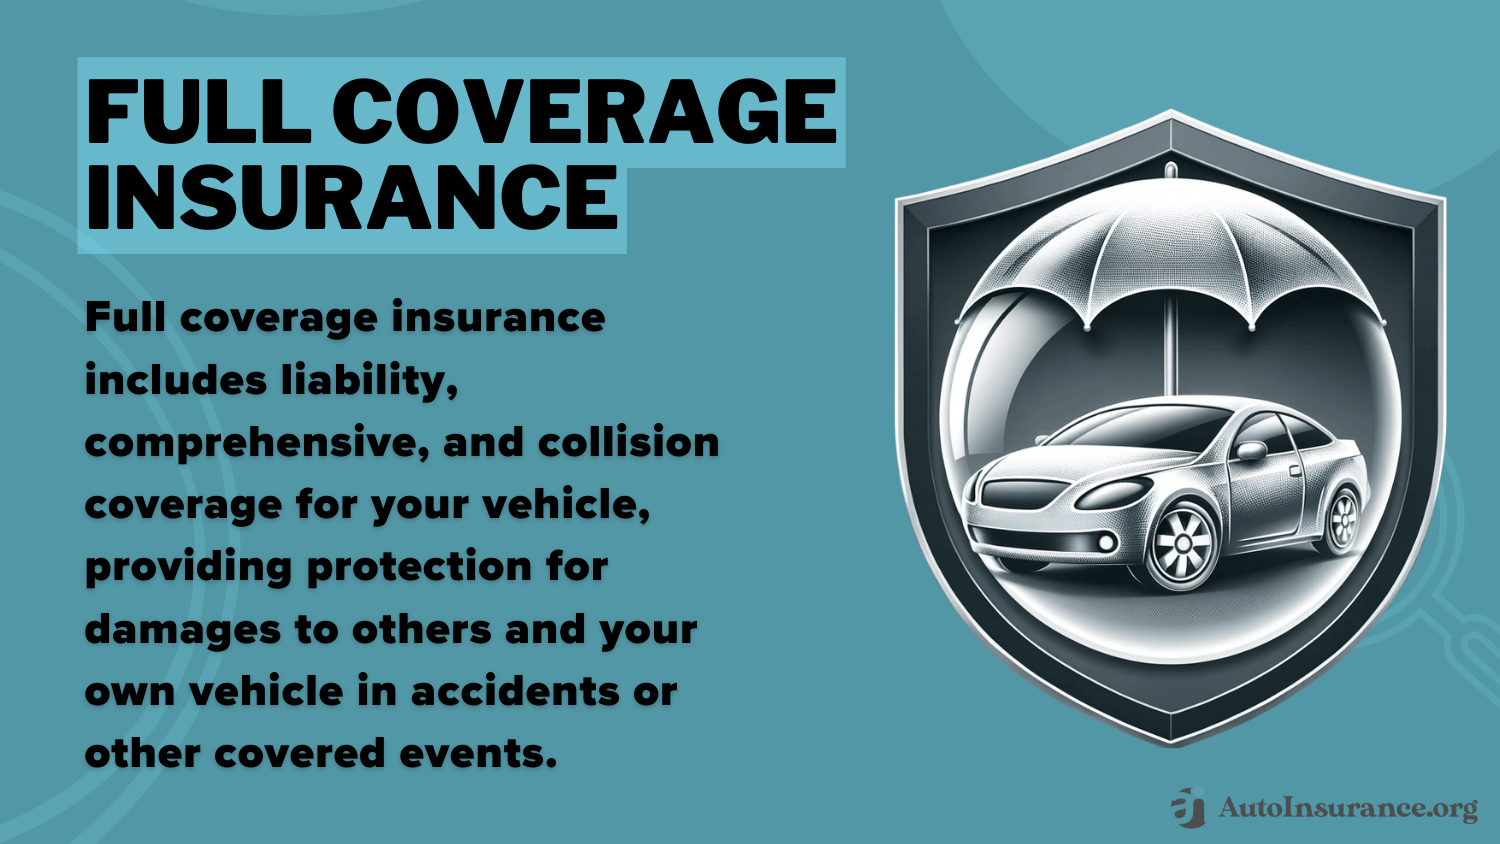 CURE Auto Insurance Review: Full Coverage Insurance Definition Card